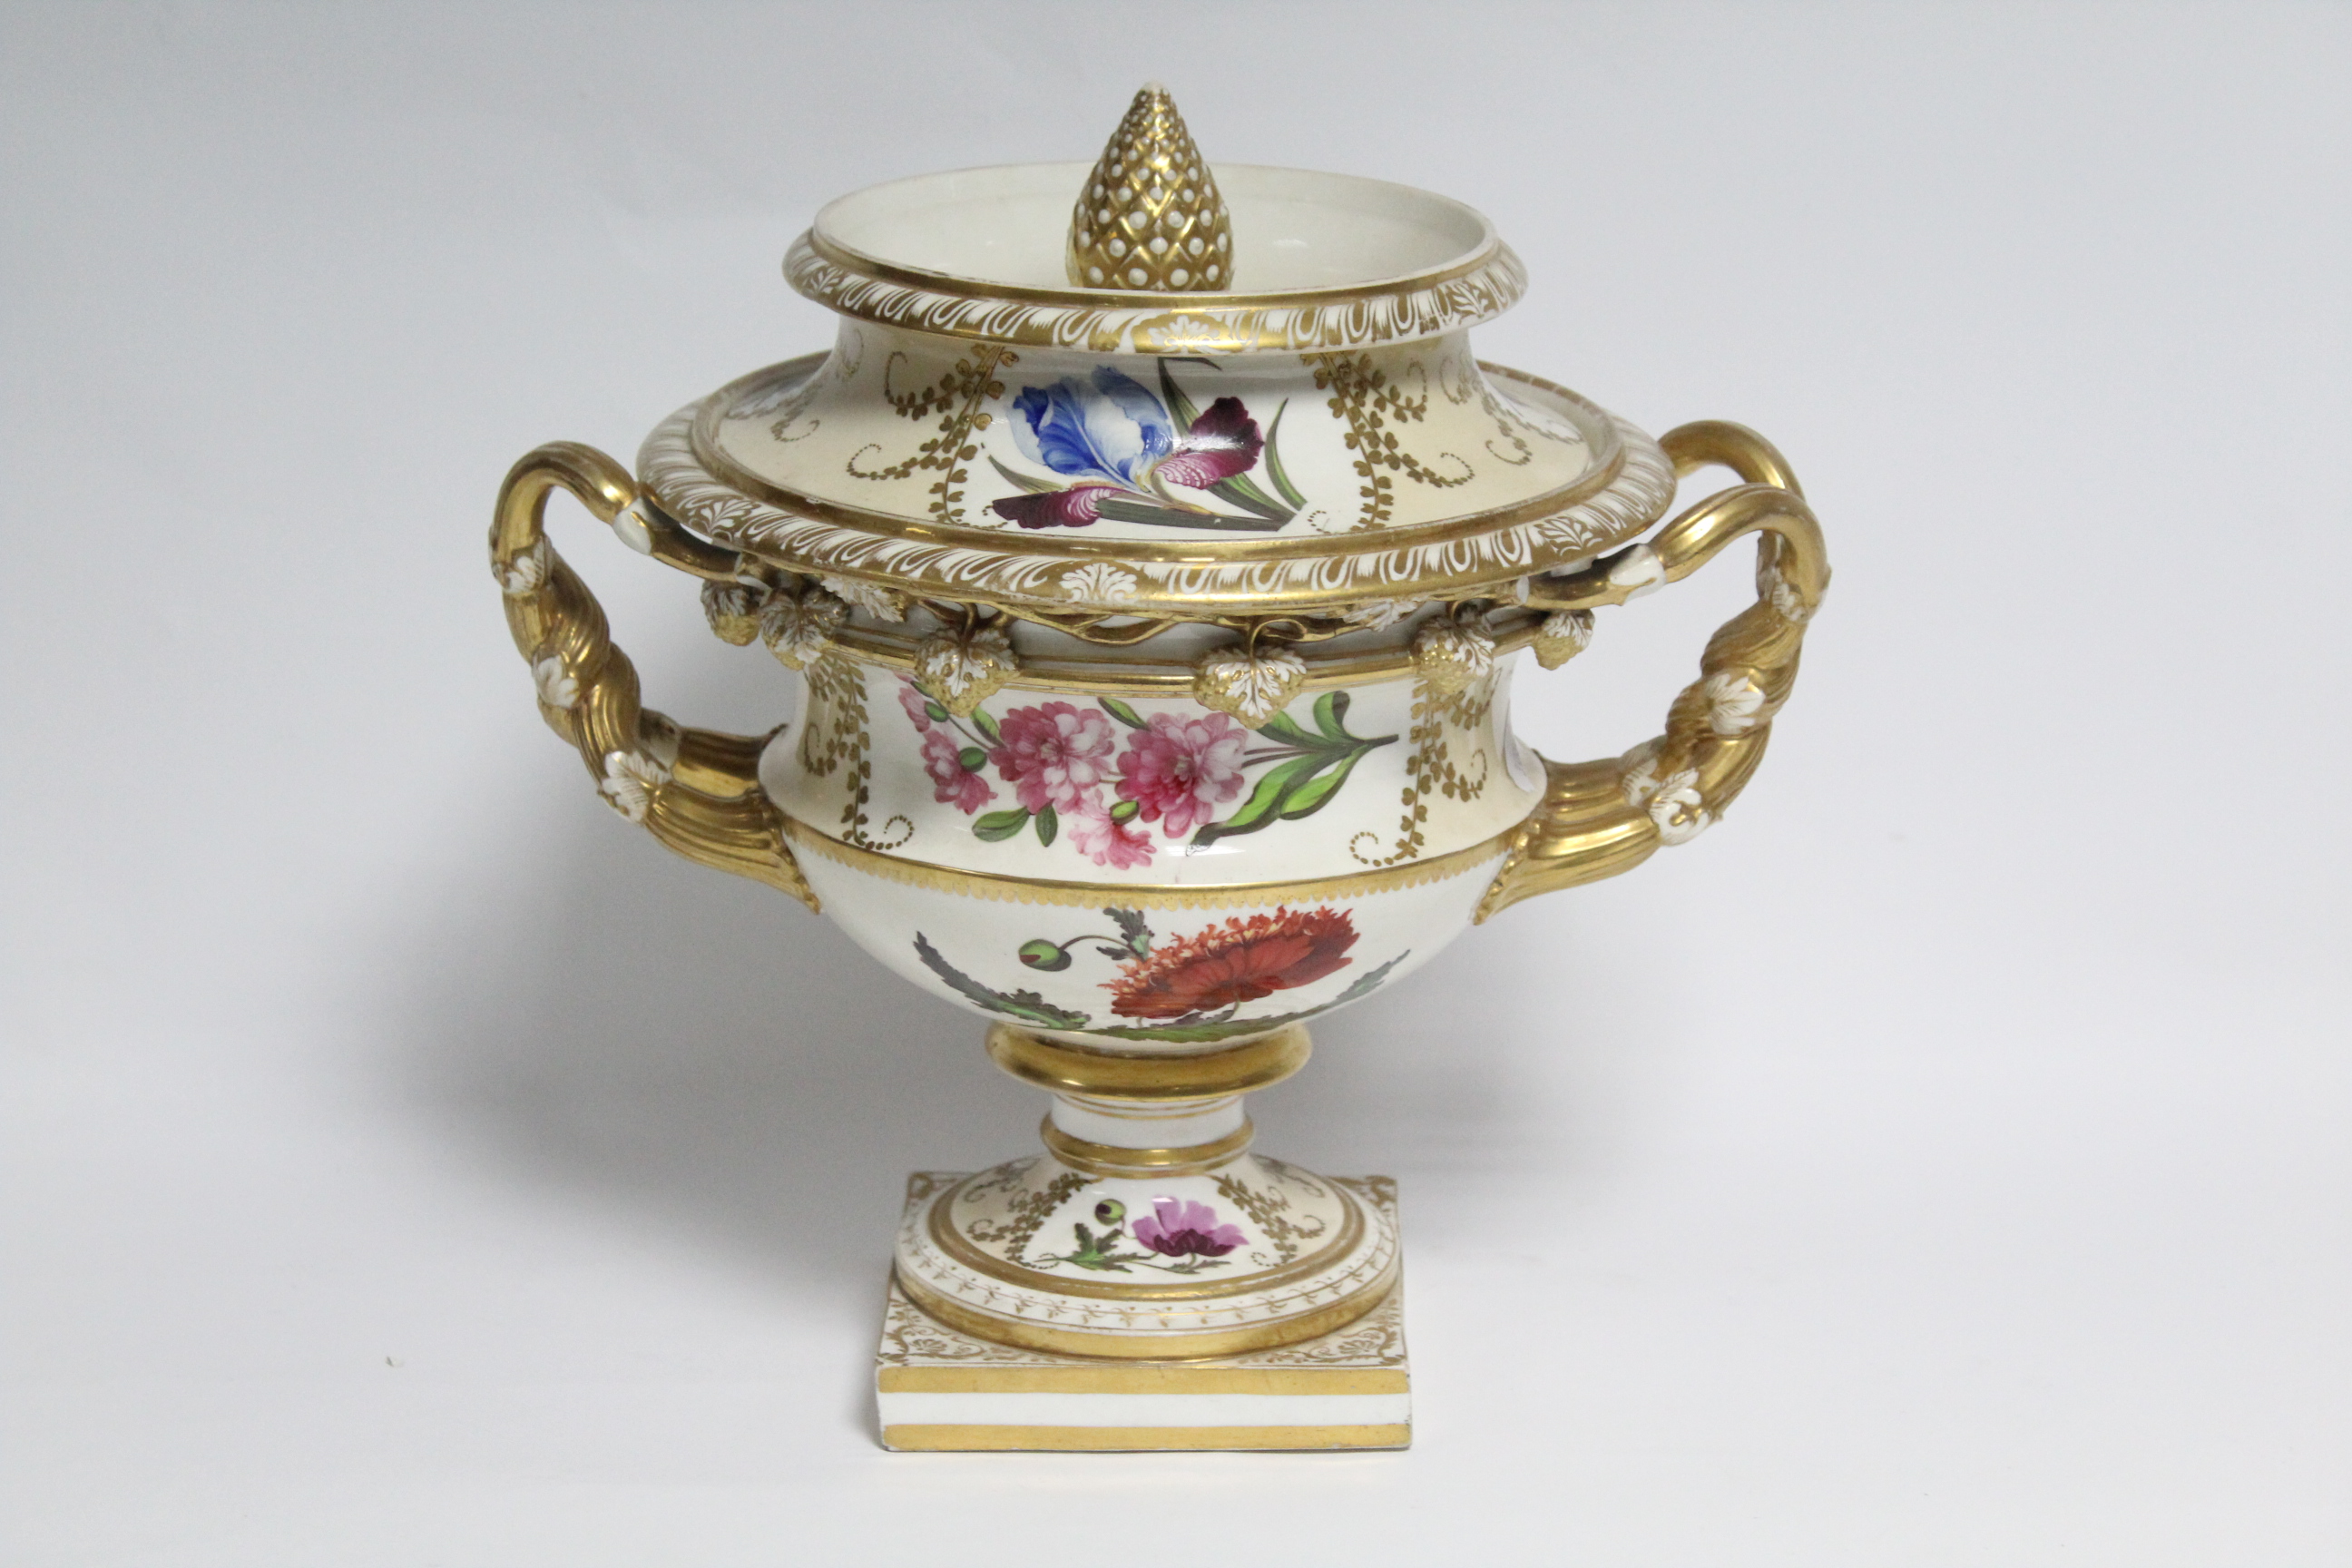 A CHAMBERLAIN’S WORCESTER ICE PAIL of Warwick Vase form, with pine-cone finial to the cover, - Image 2 of 6